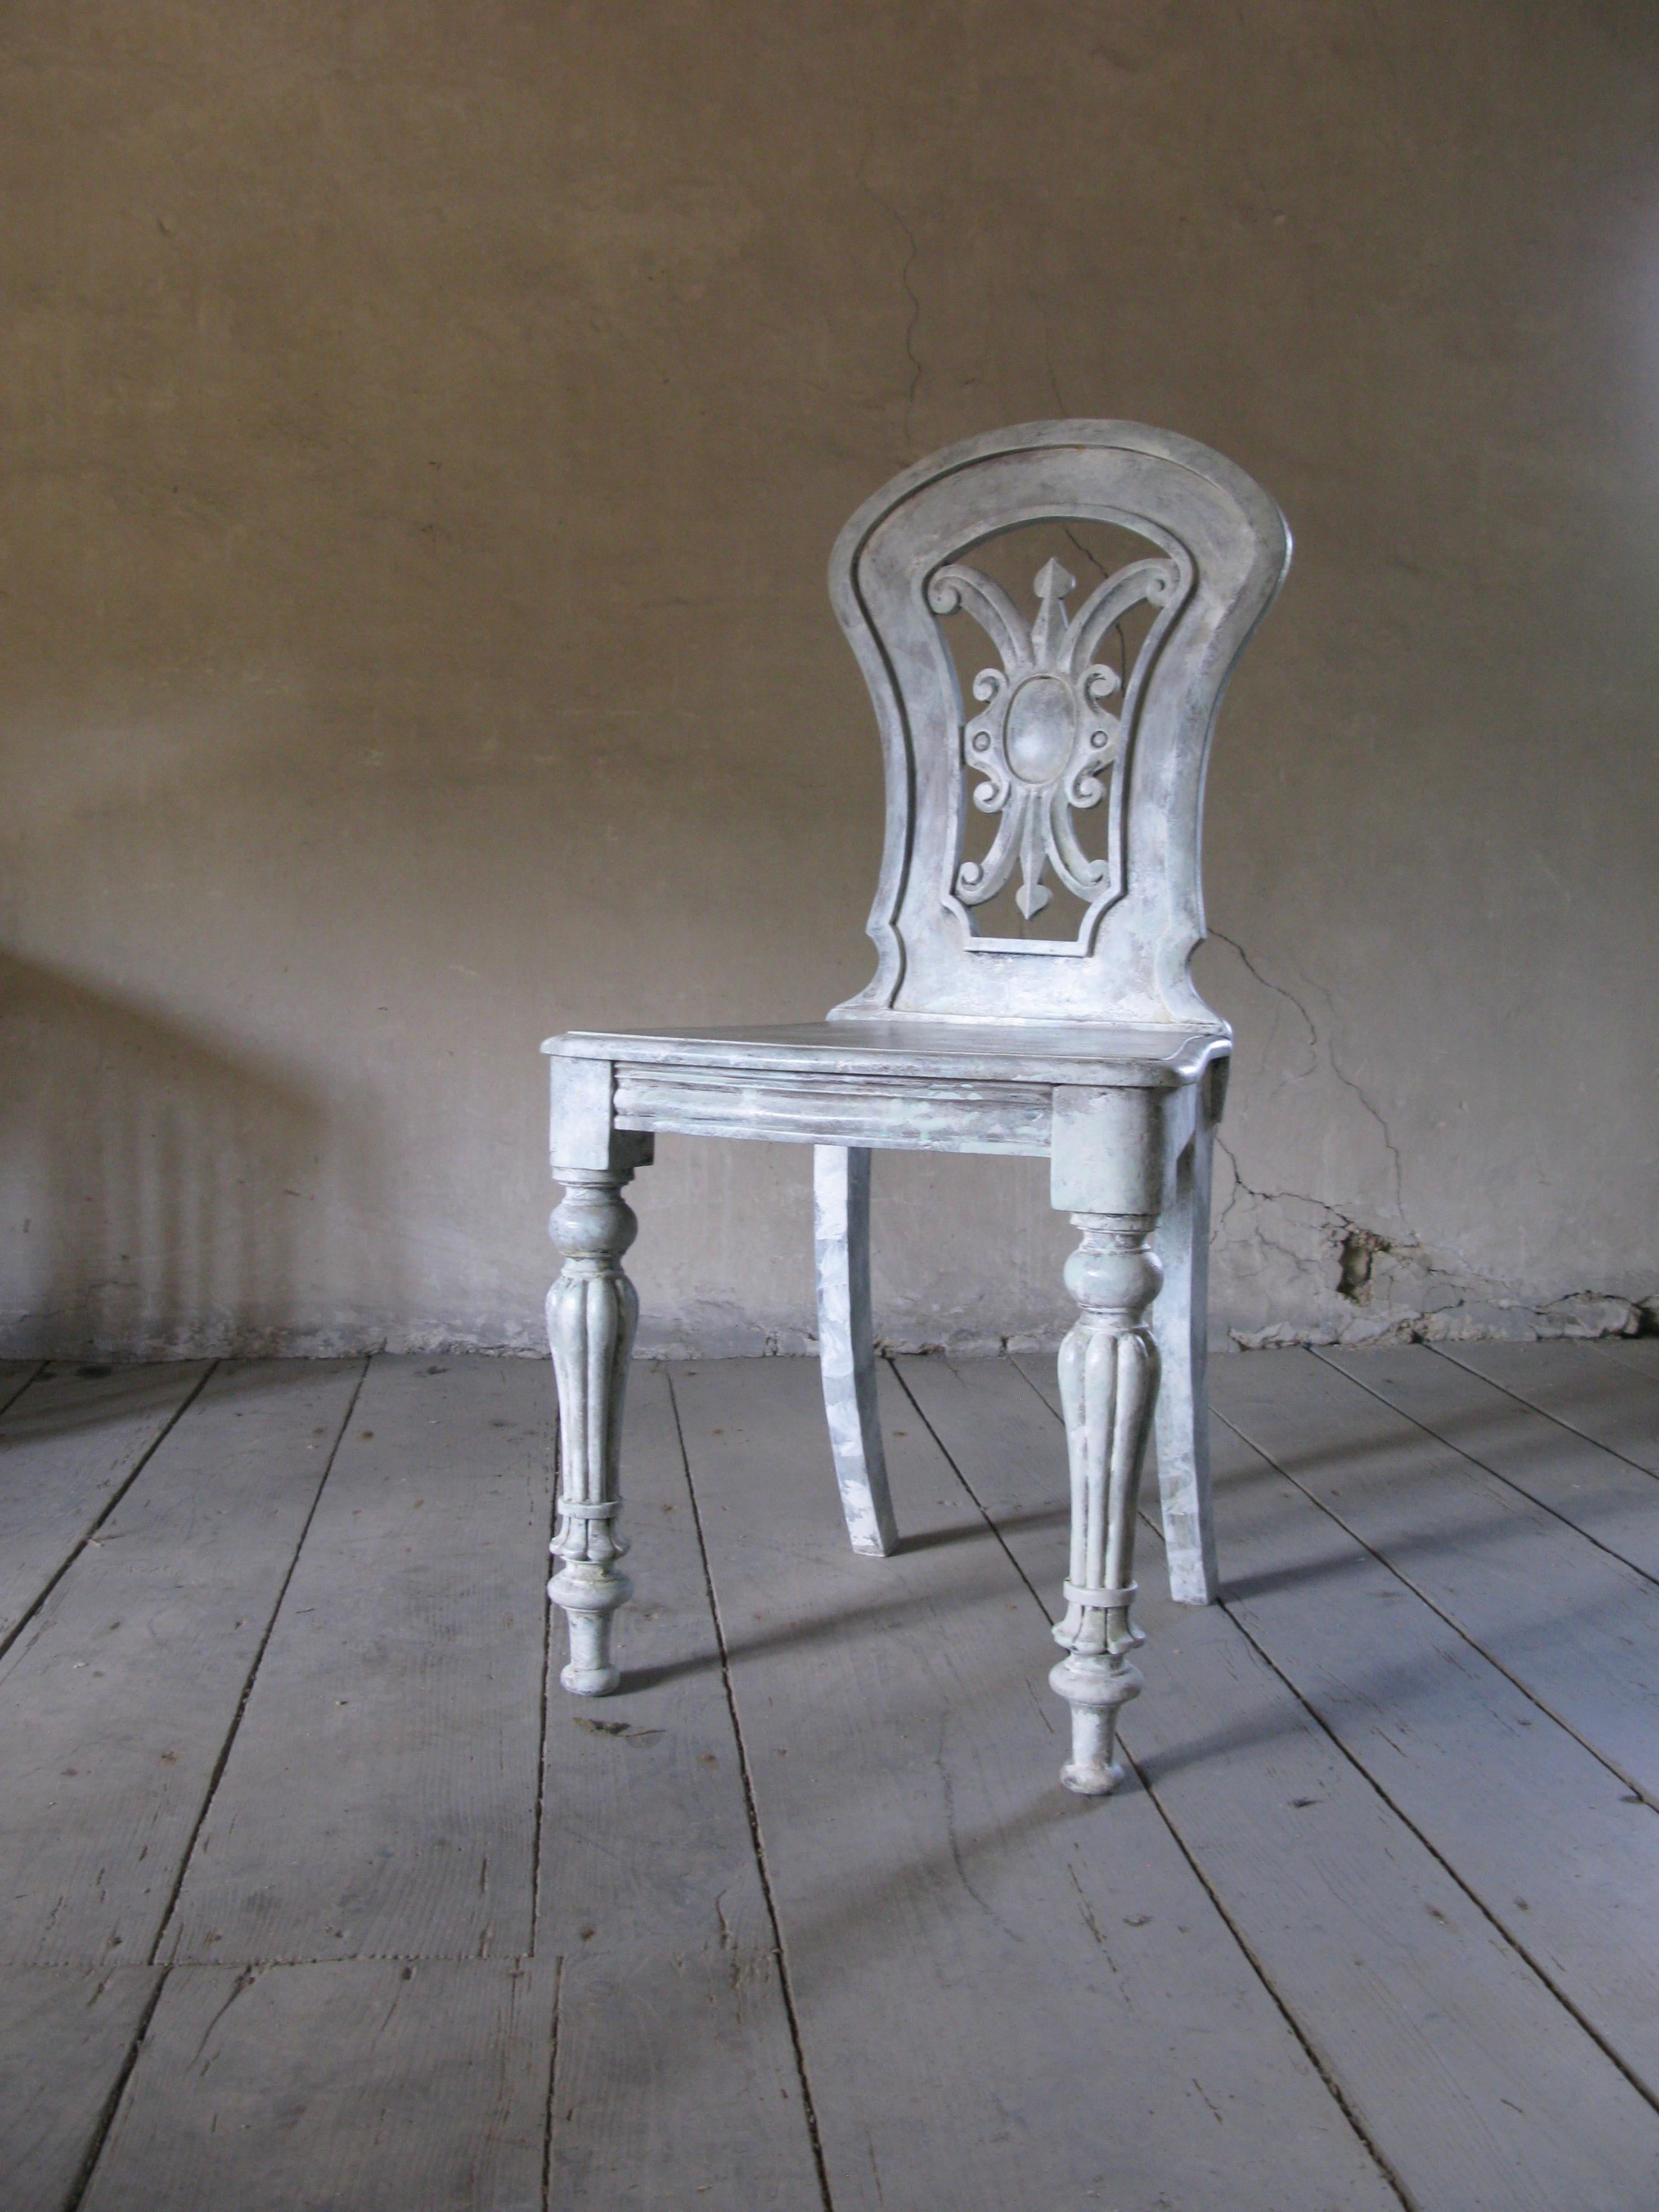 Lovely antique English side chair
painted
Decorative piece!

Word from the owner
During these uncertain times, we feel grateful that we are able to work from home and are committed to keeping projects moving ahead for our clients.
Our